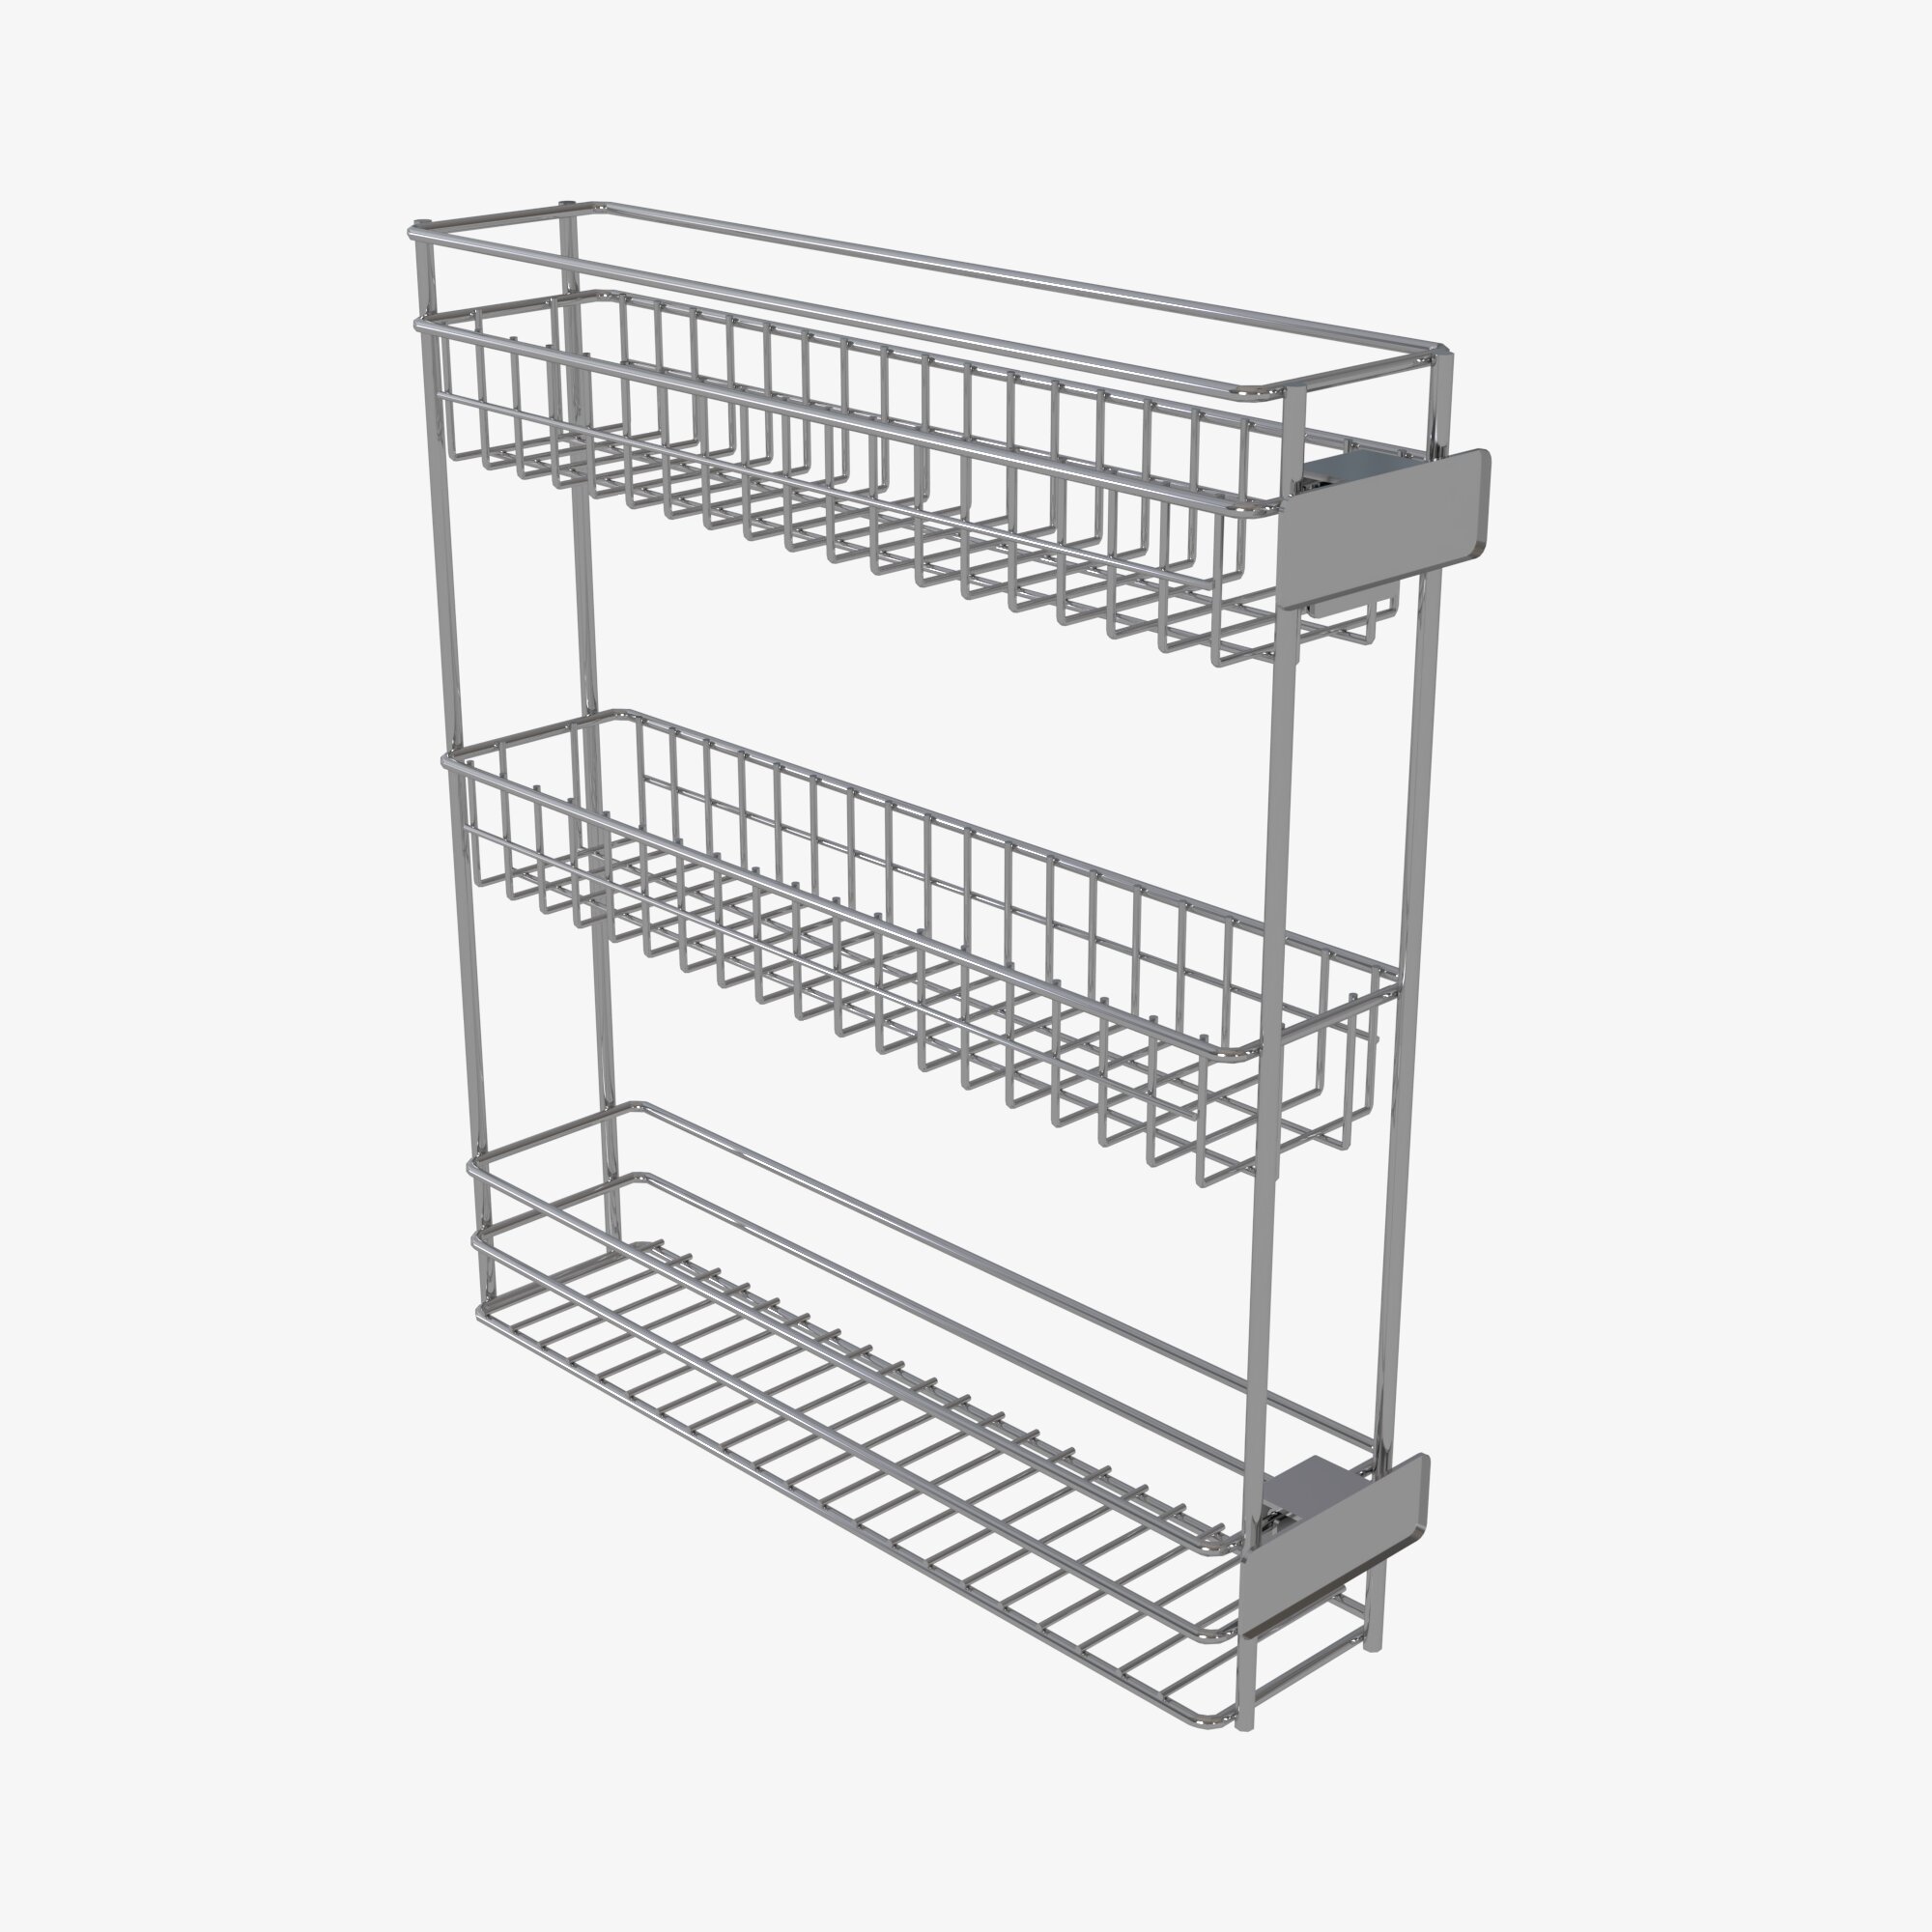 Steel Pull Out Pantry